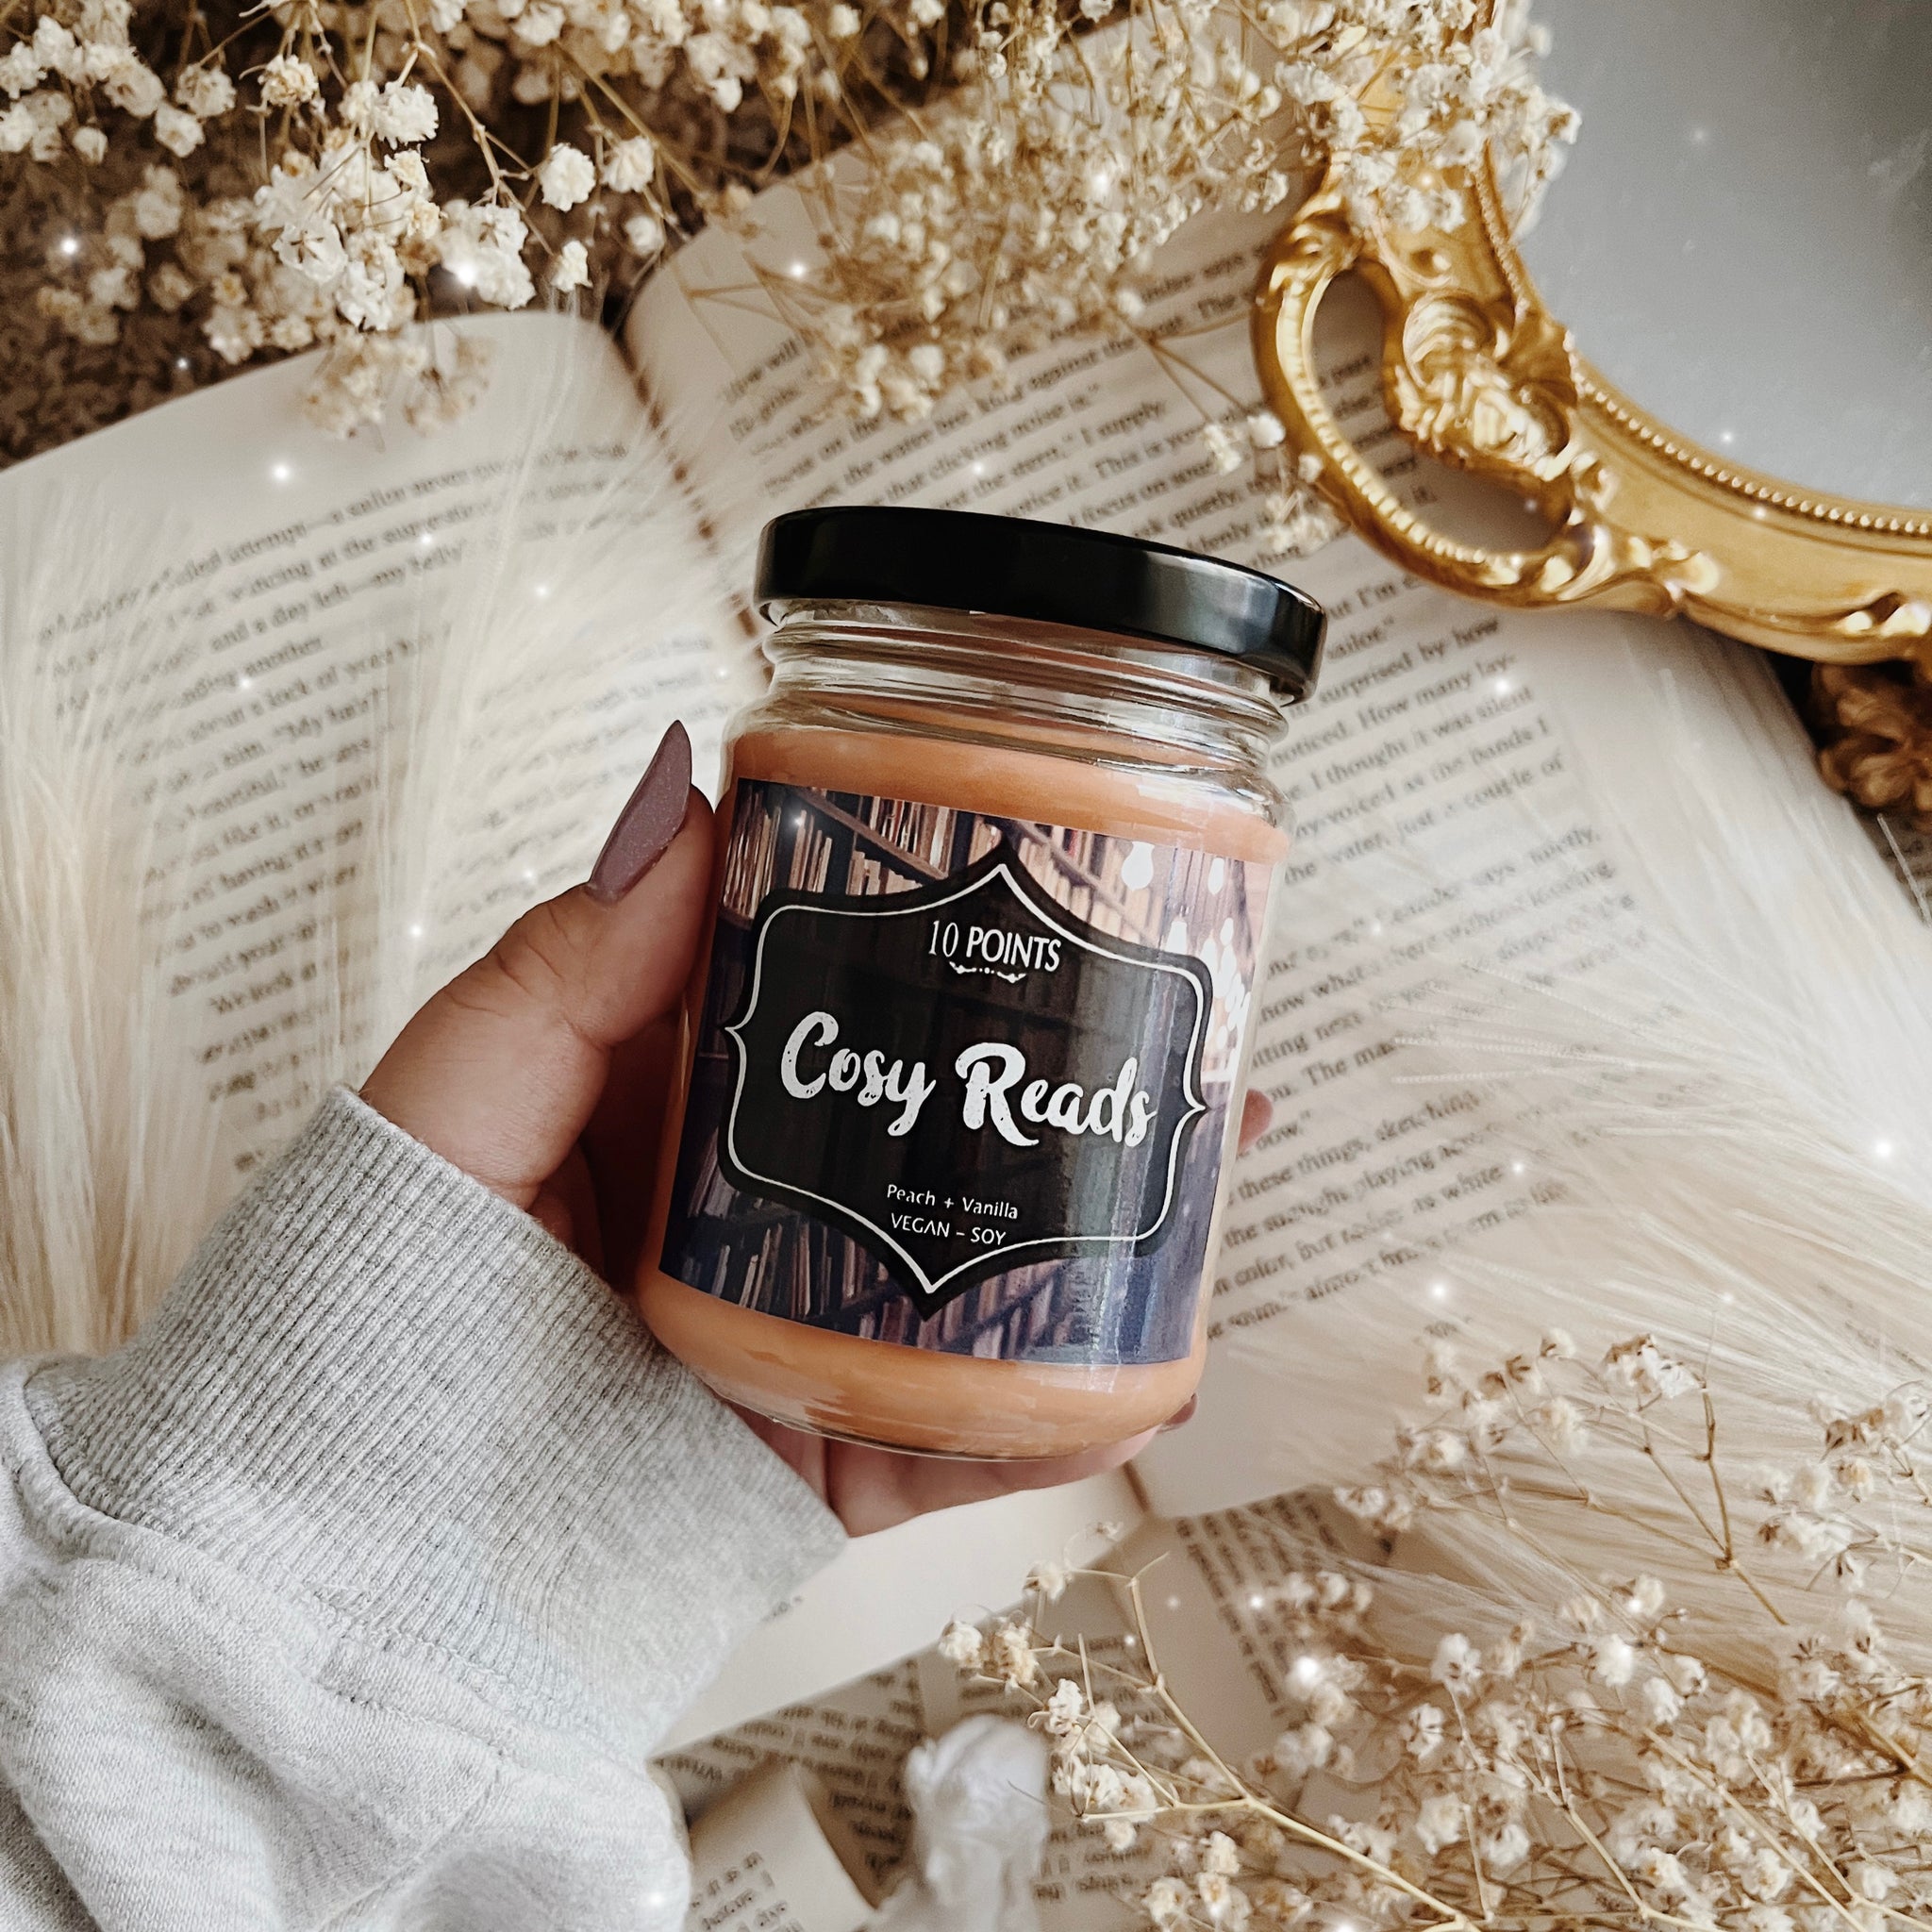 Cosy Reads  - Bookish Inspired Soy Candle  Scent Notes: Peach + Vanilla